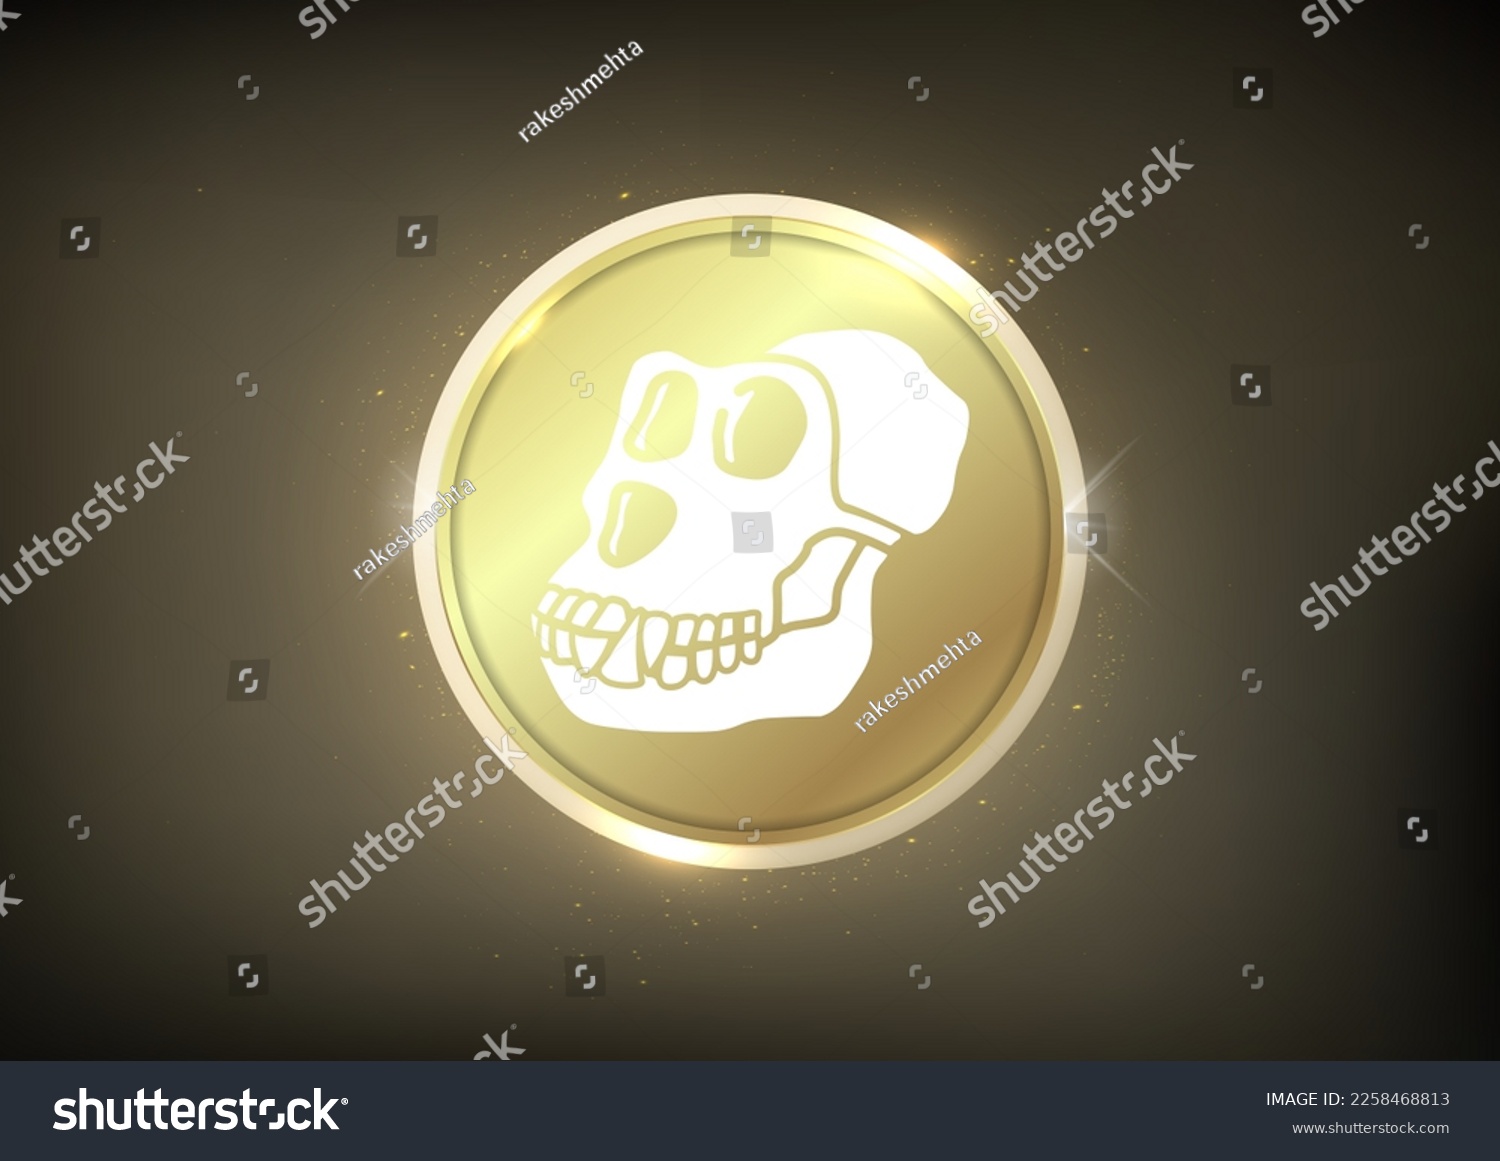 SVG of Ape coin  Crypto logo banner . Apecoin  cryptocurrency golden coin symbol  isolated on golden background  svg